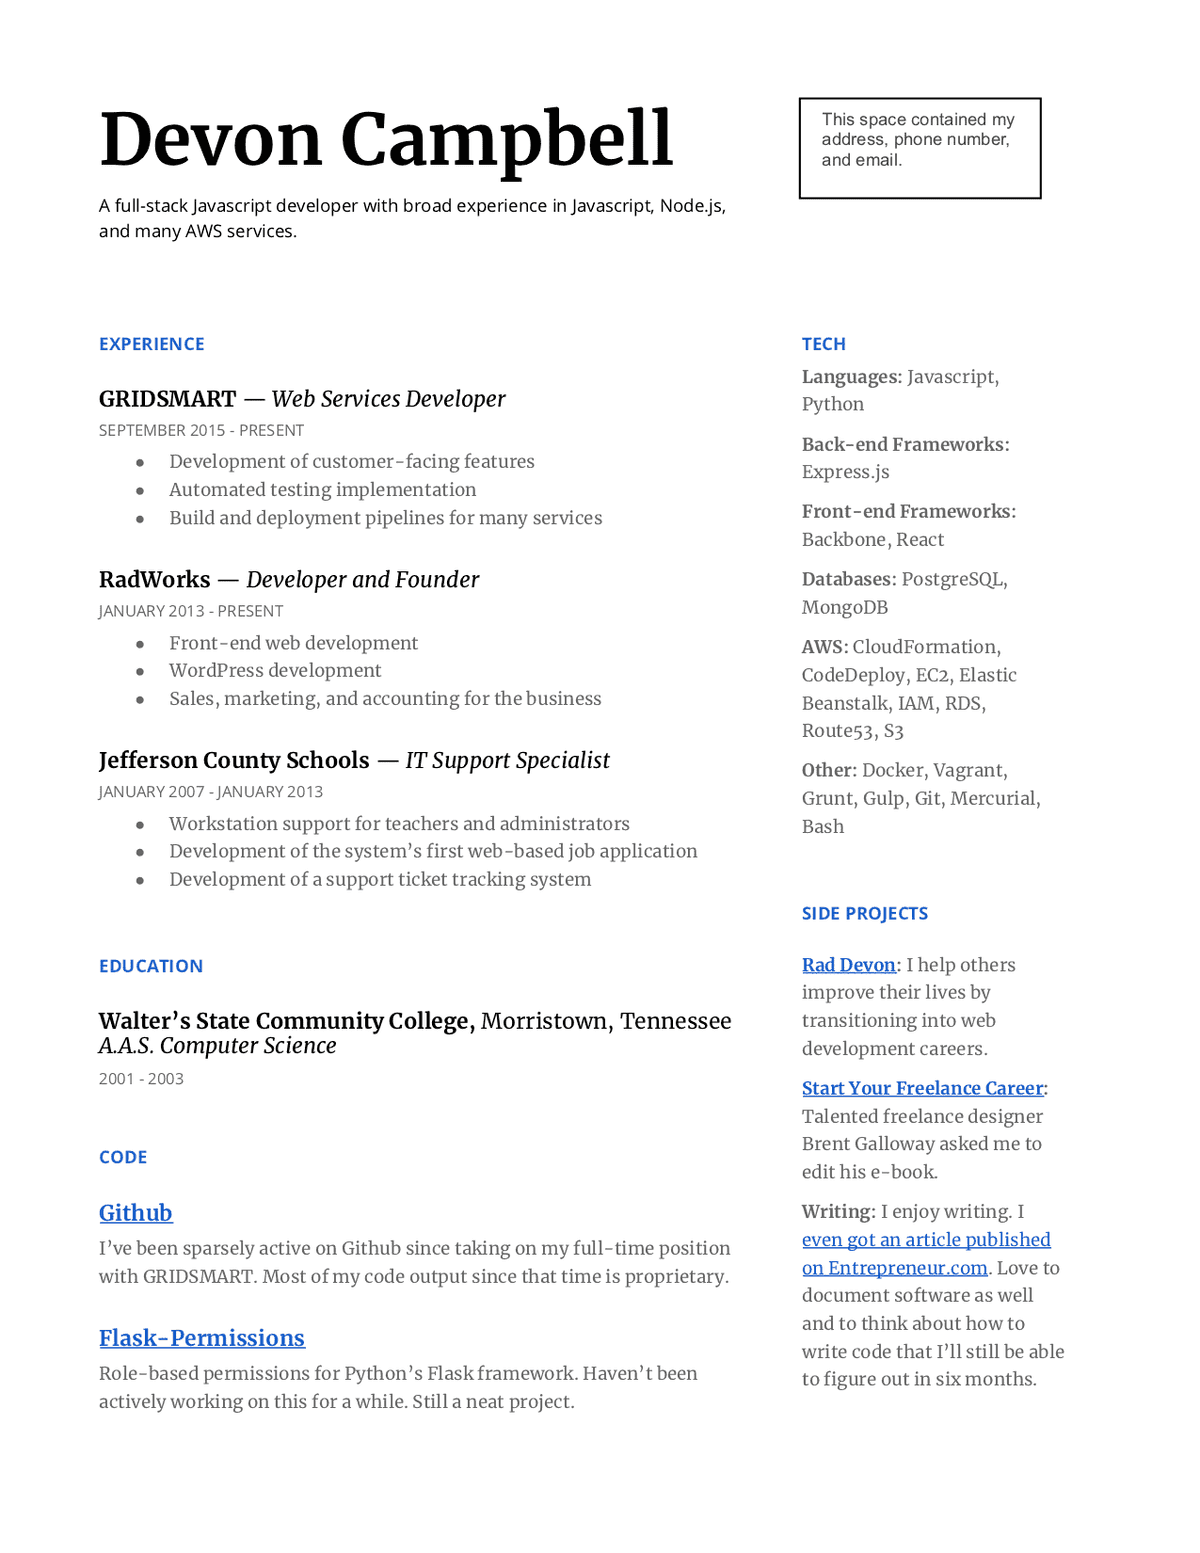 Résumé I submitted with my most recent job application